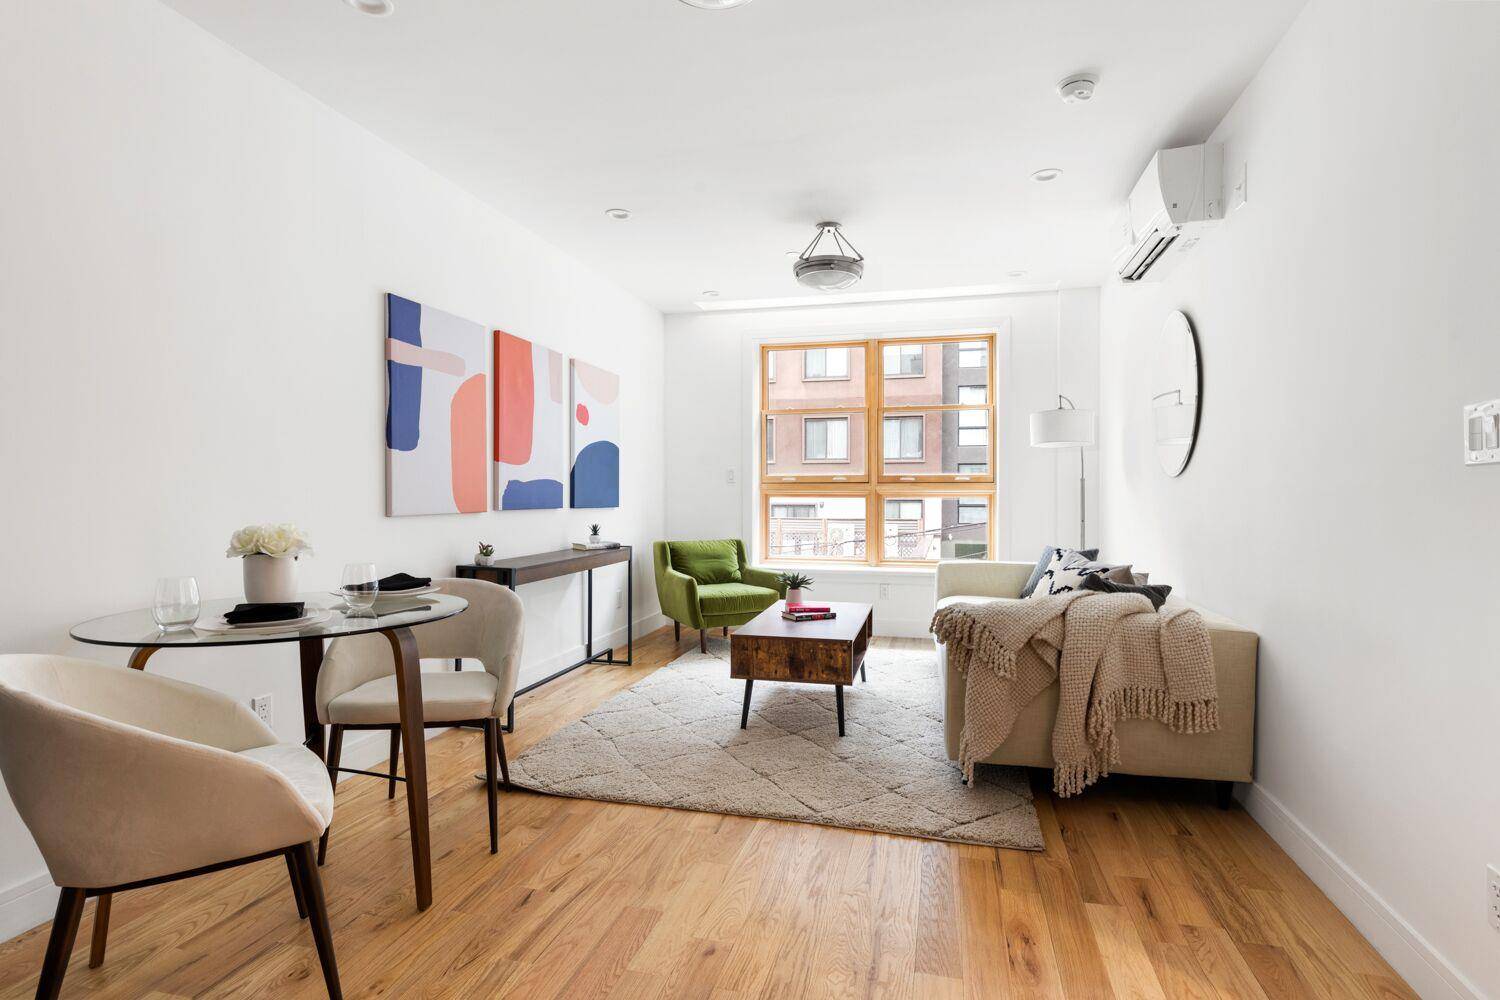 Introducing 803 Quincy Street, a brand new, eight unit boutique condominium comprised of one three bedroom 1BR 3BR residences in the historic Stuyvesant Heights section of Bedford Stuyvesant, Brooklyn.